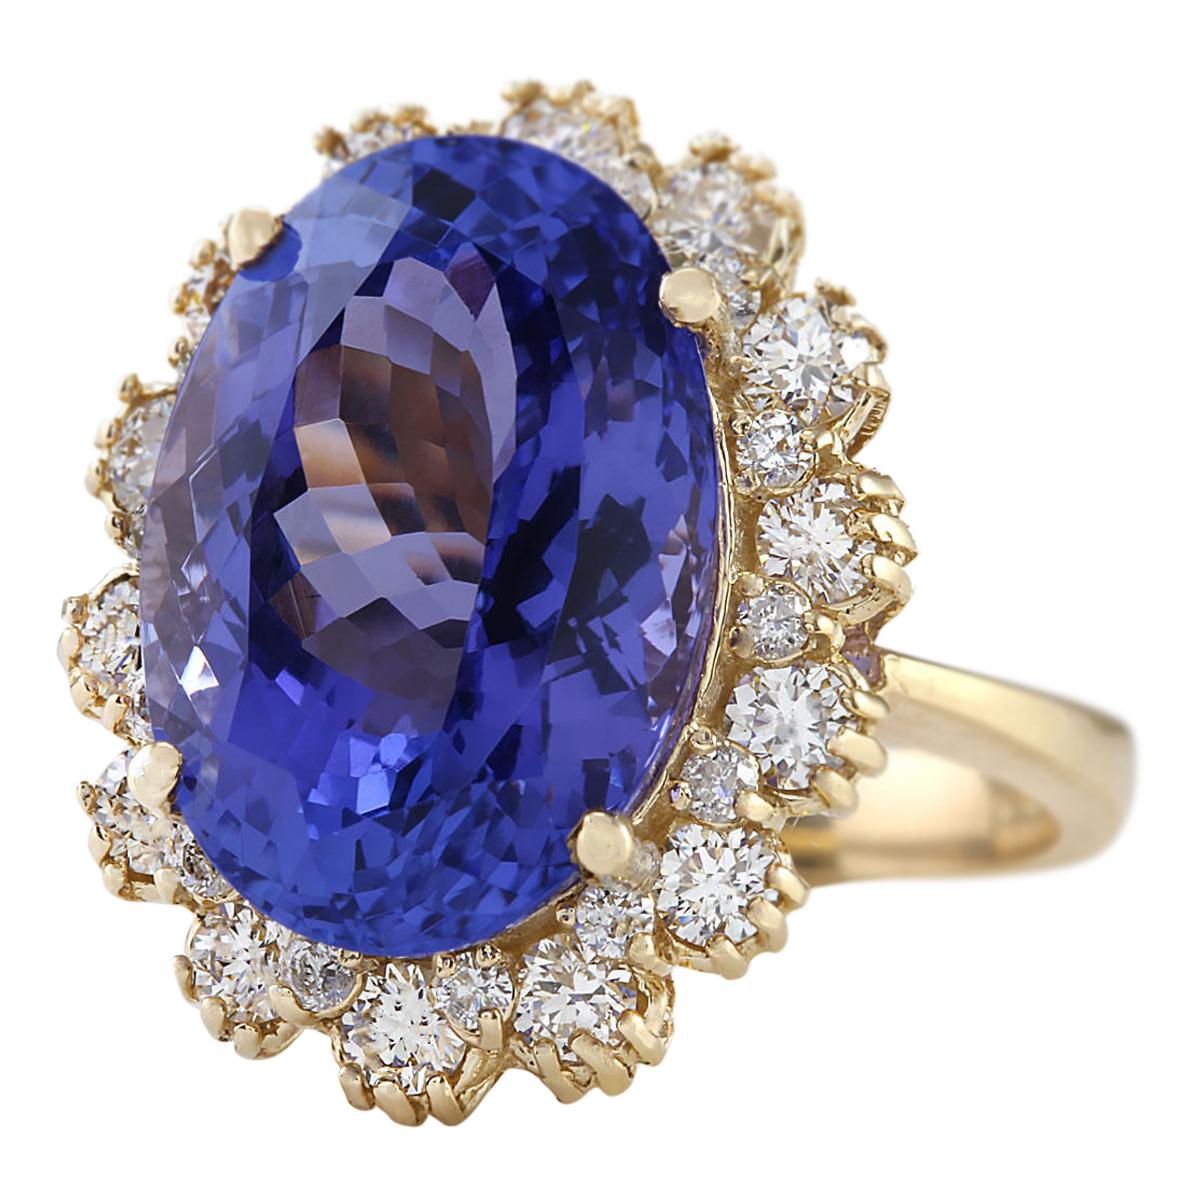 Indulge in luxury beyond compare with our remarkable 12.38 Carat Tanzanite Diamond Ring, meticulously crafted in 14 Karat Yellow Gold. Every aspect of this exquisite piece speaks to uncompromising quality and timeless elegance, from the